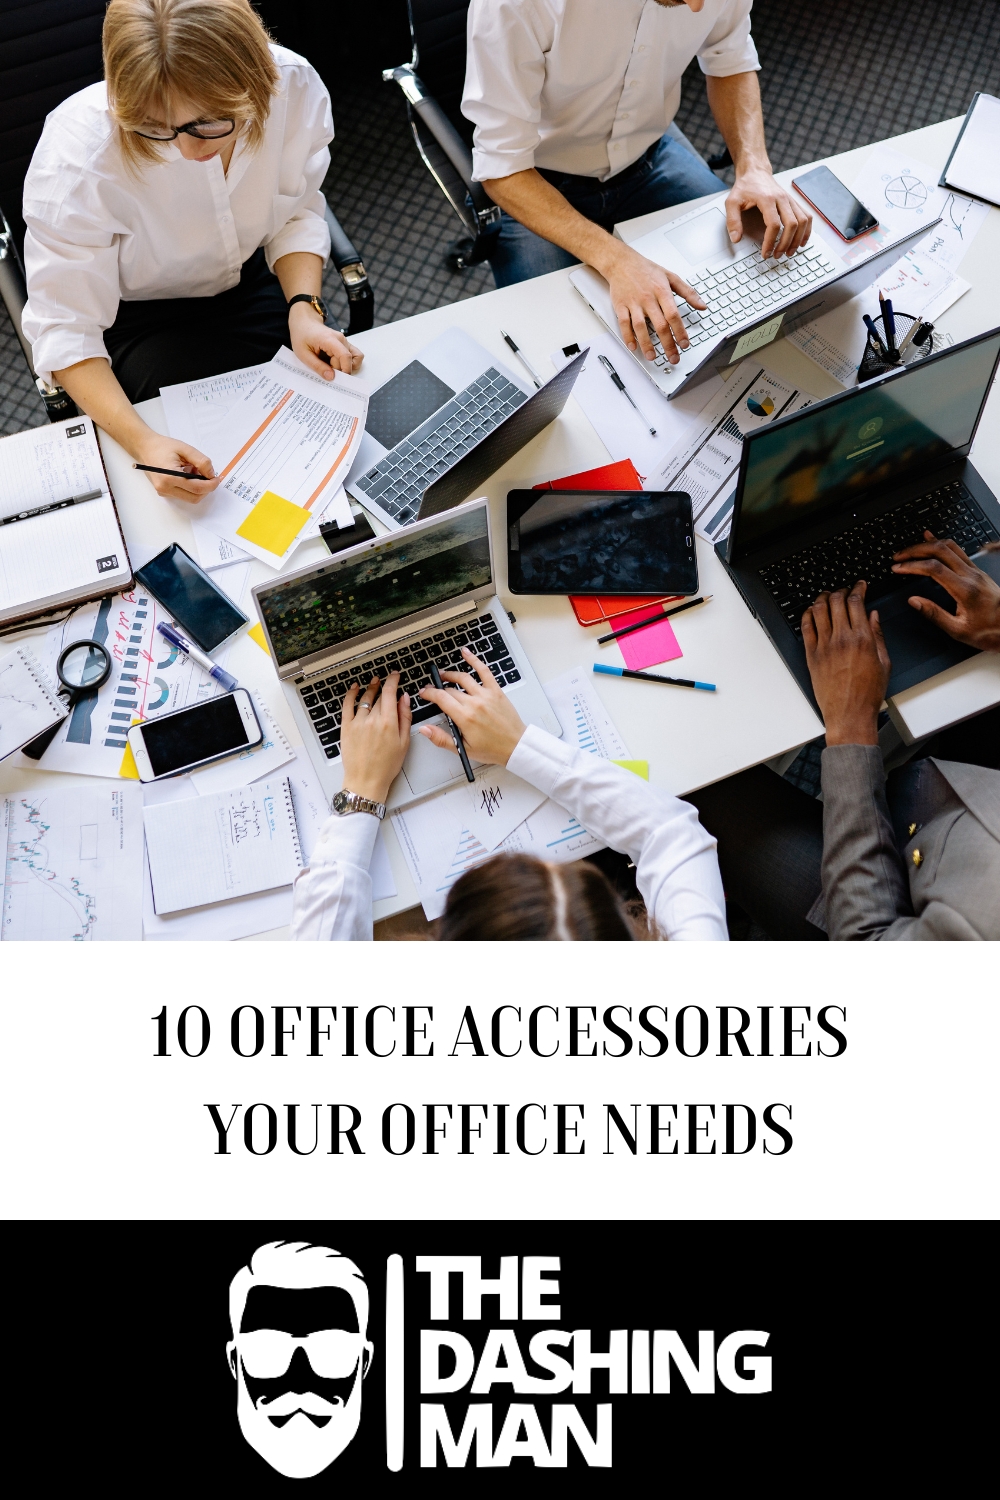 10 Office Accessories Your Office Needs